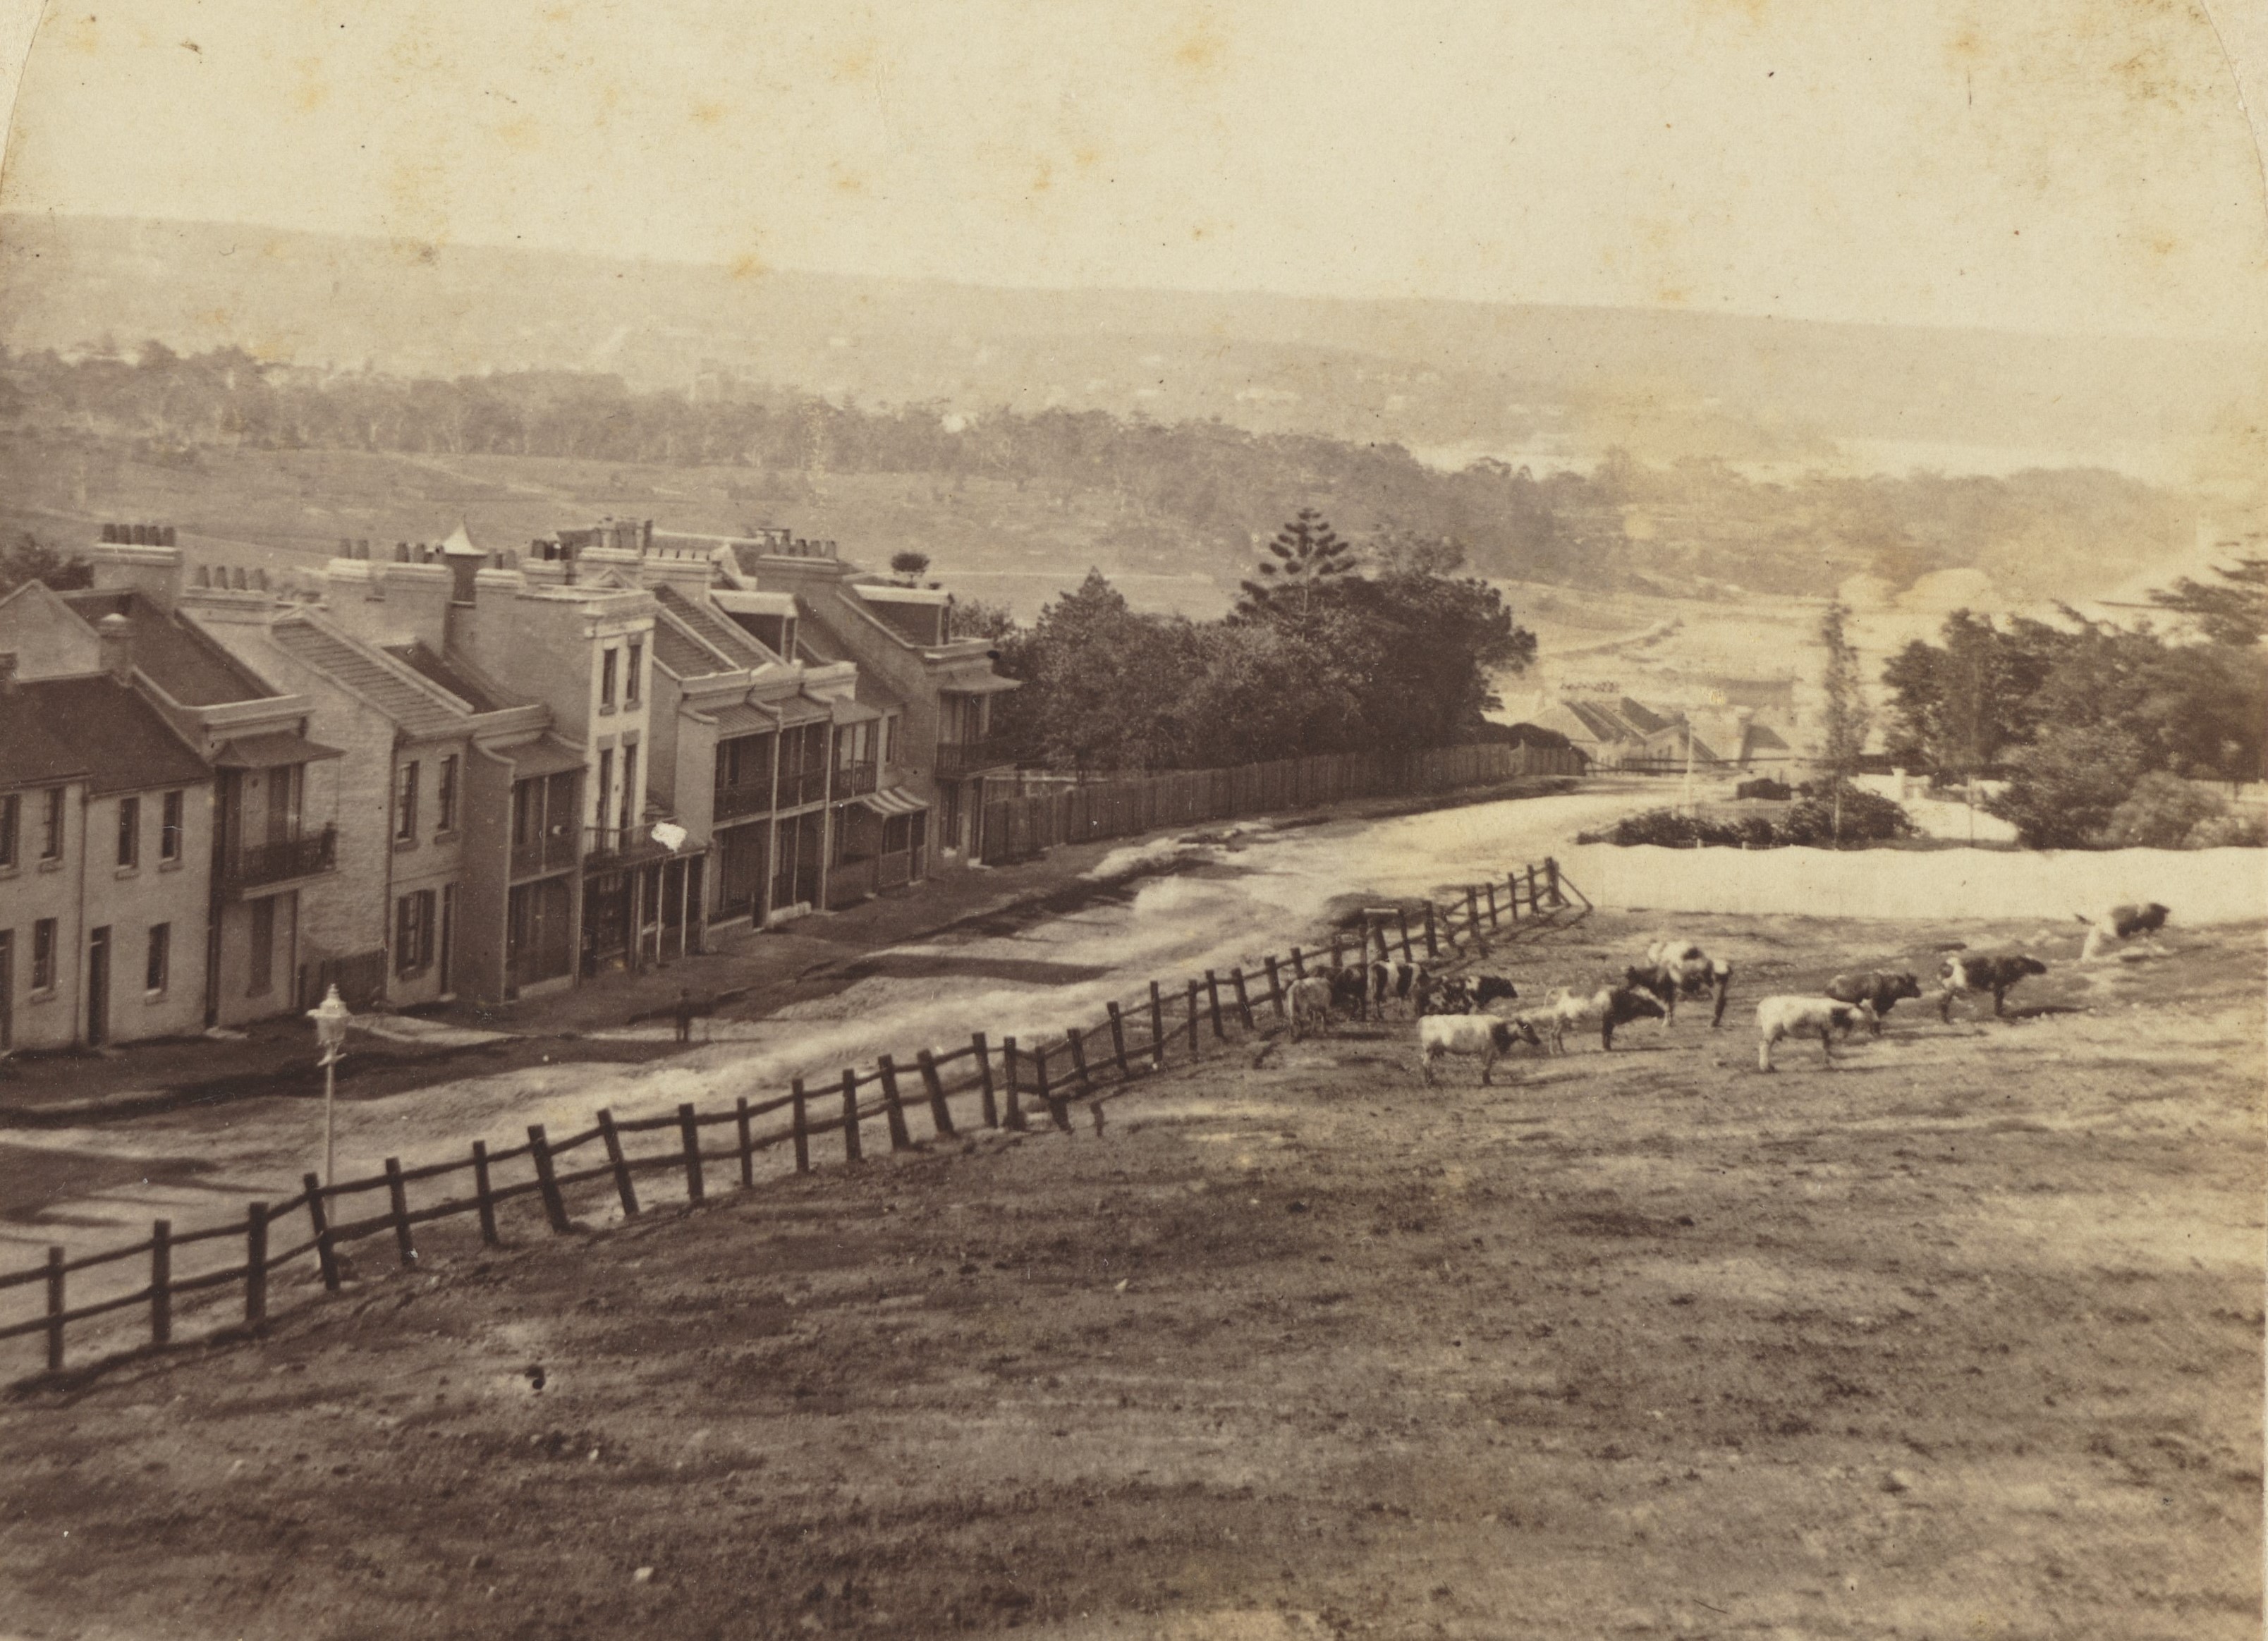 Photograph showing a street with houses and cattle grazing